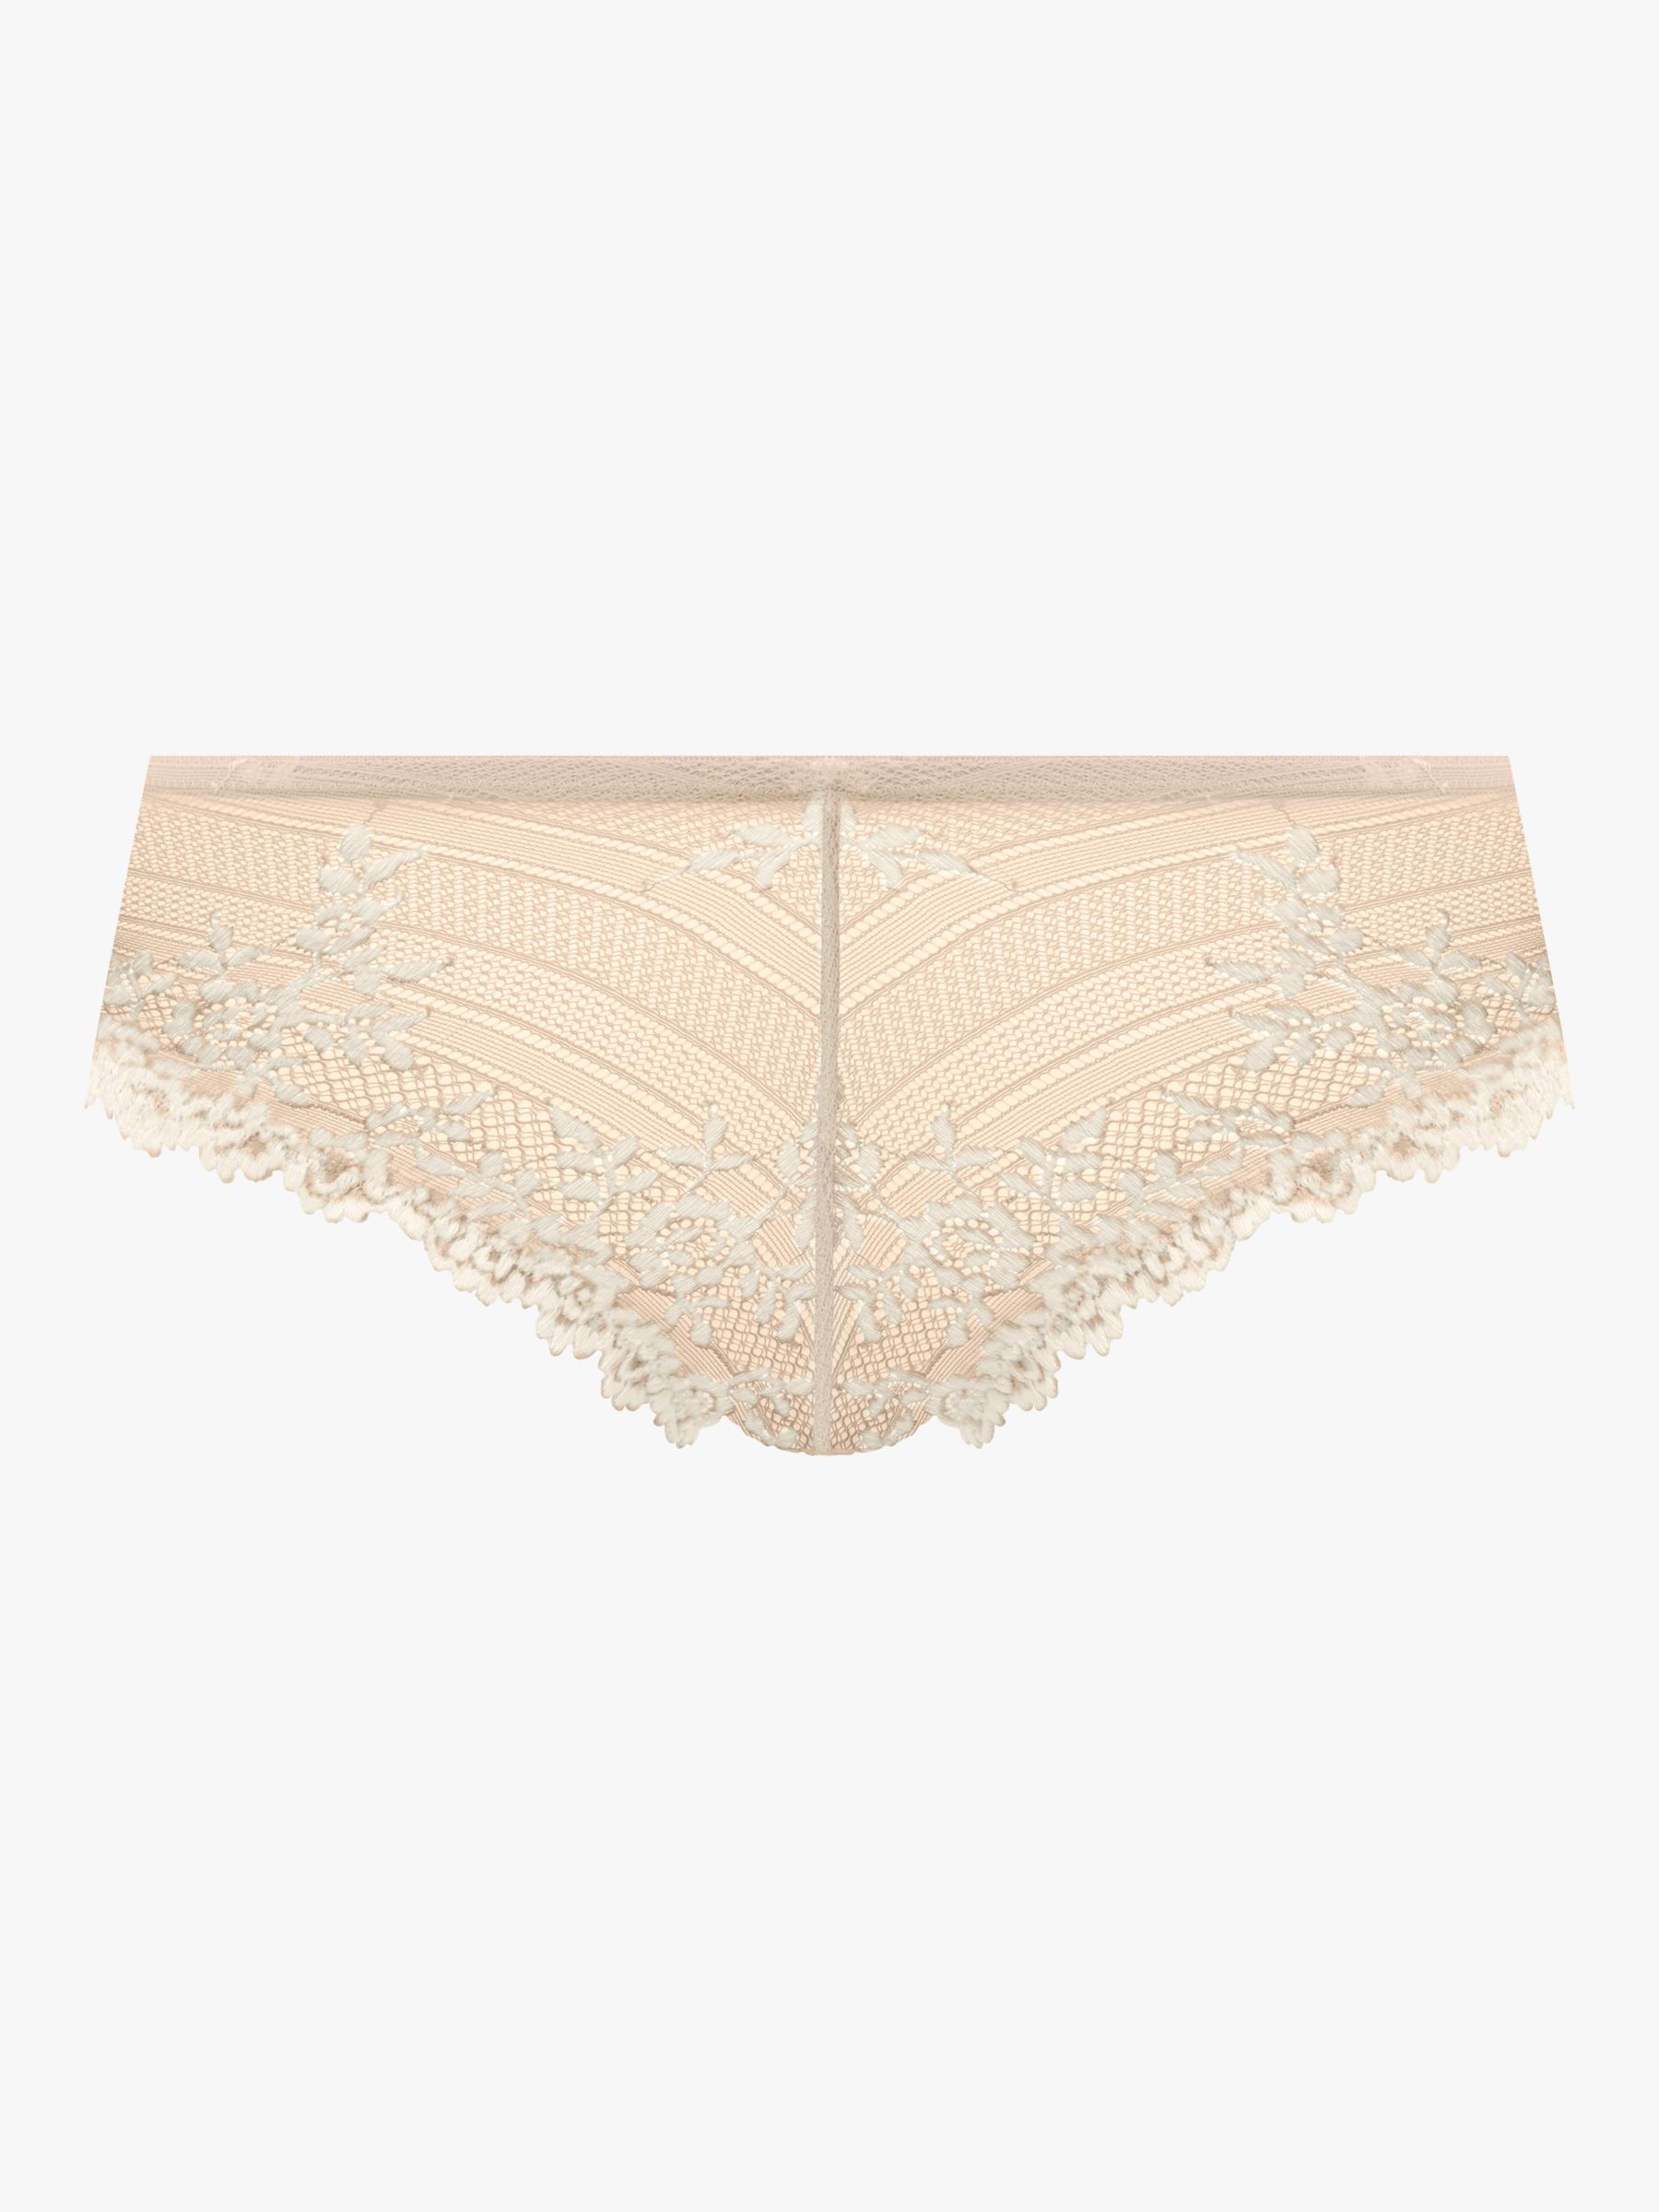 Buy Wacoal Embrace Lace Tanga Knickers Online at johnlewis.com